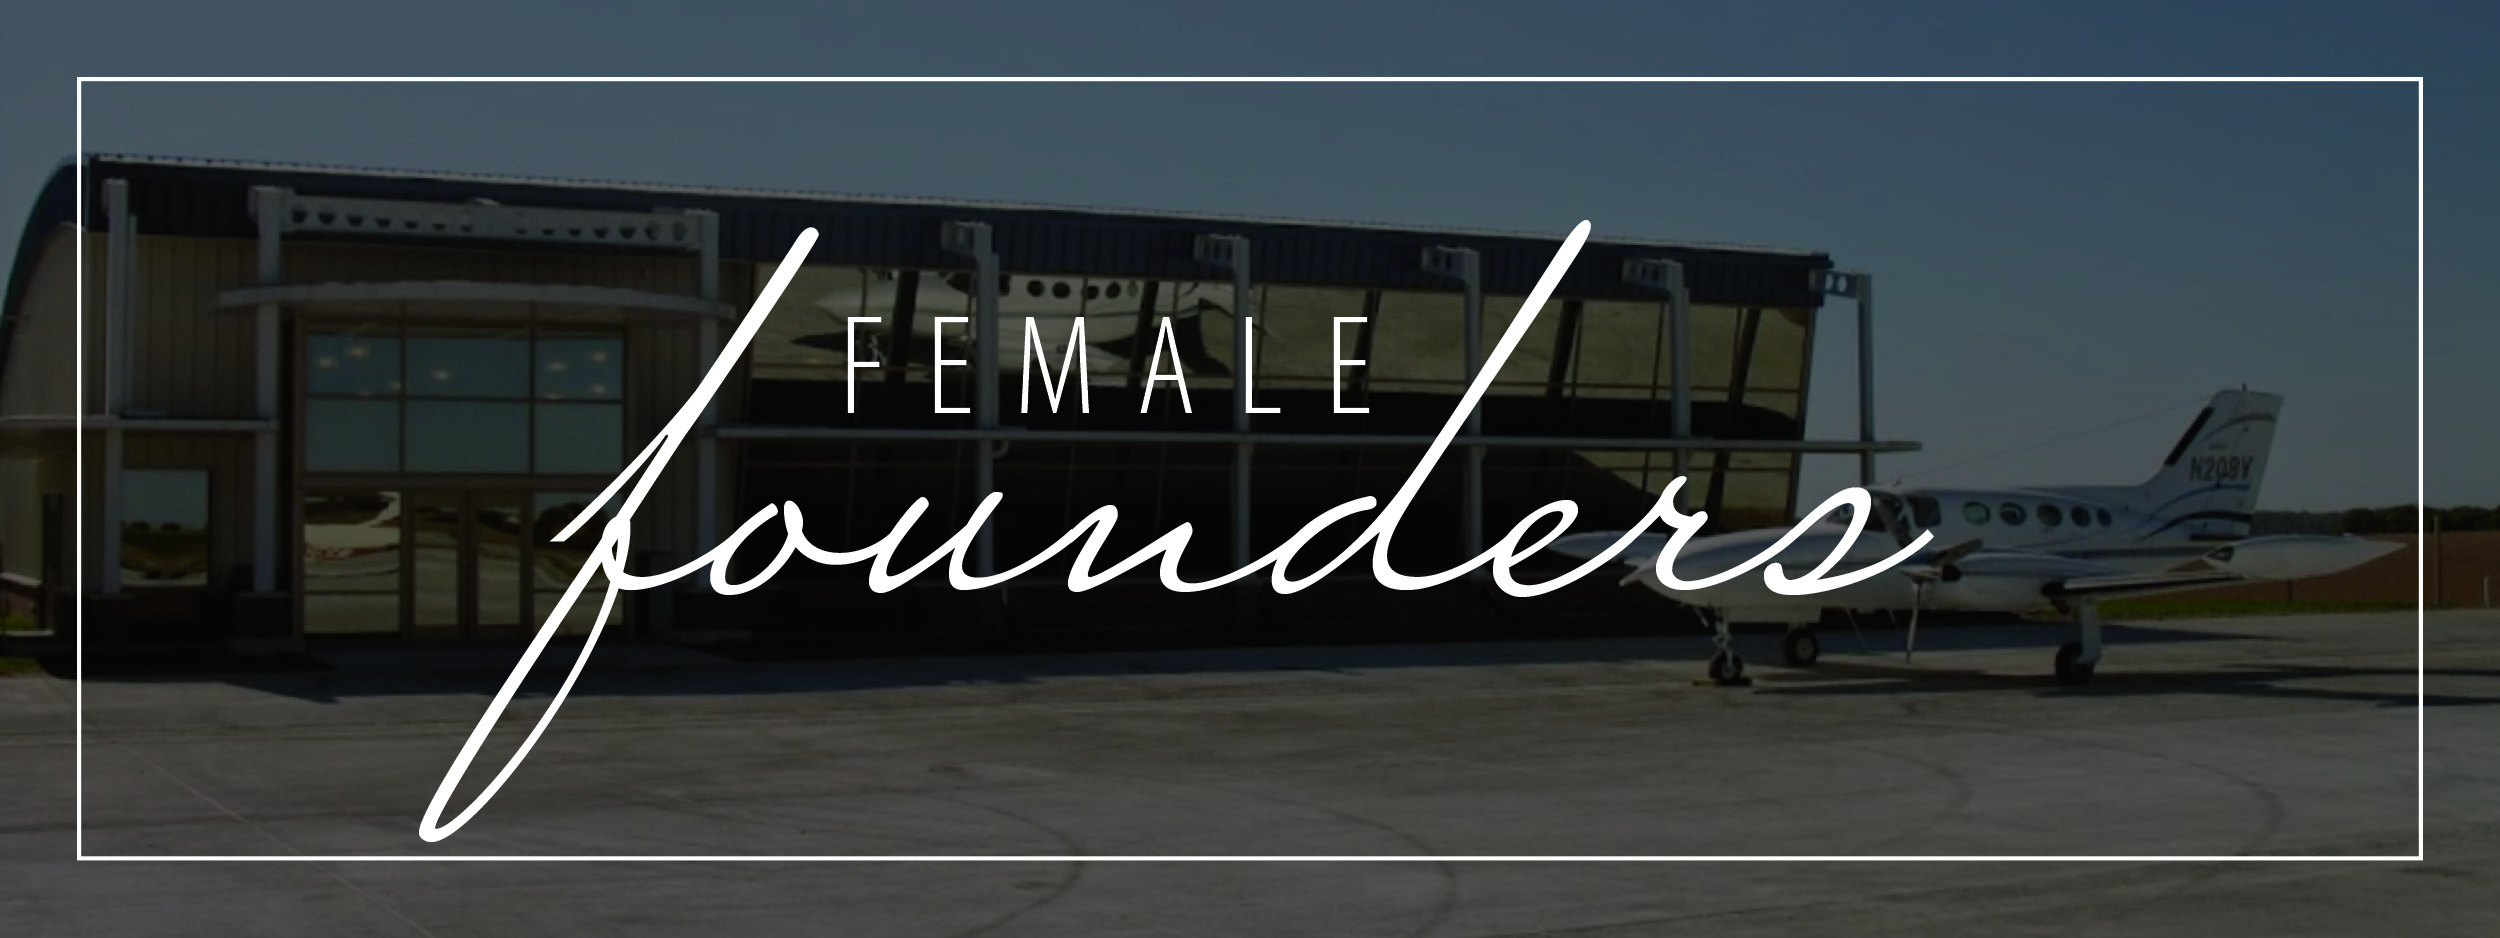 female founders written over image of outside of advanc